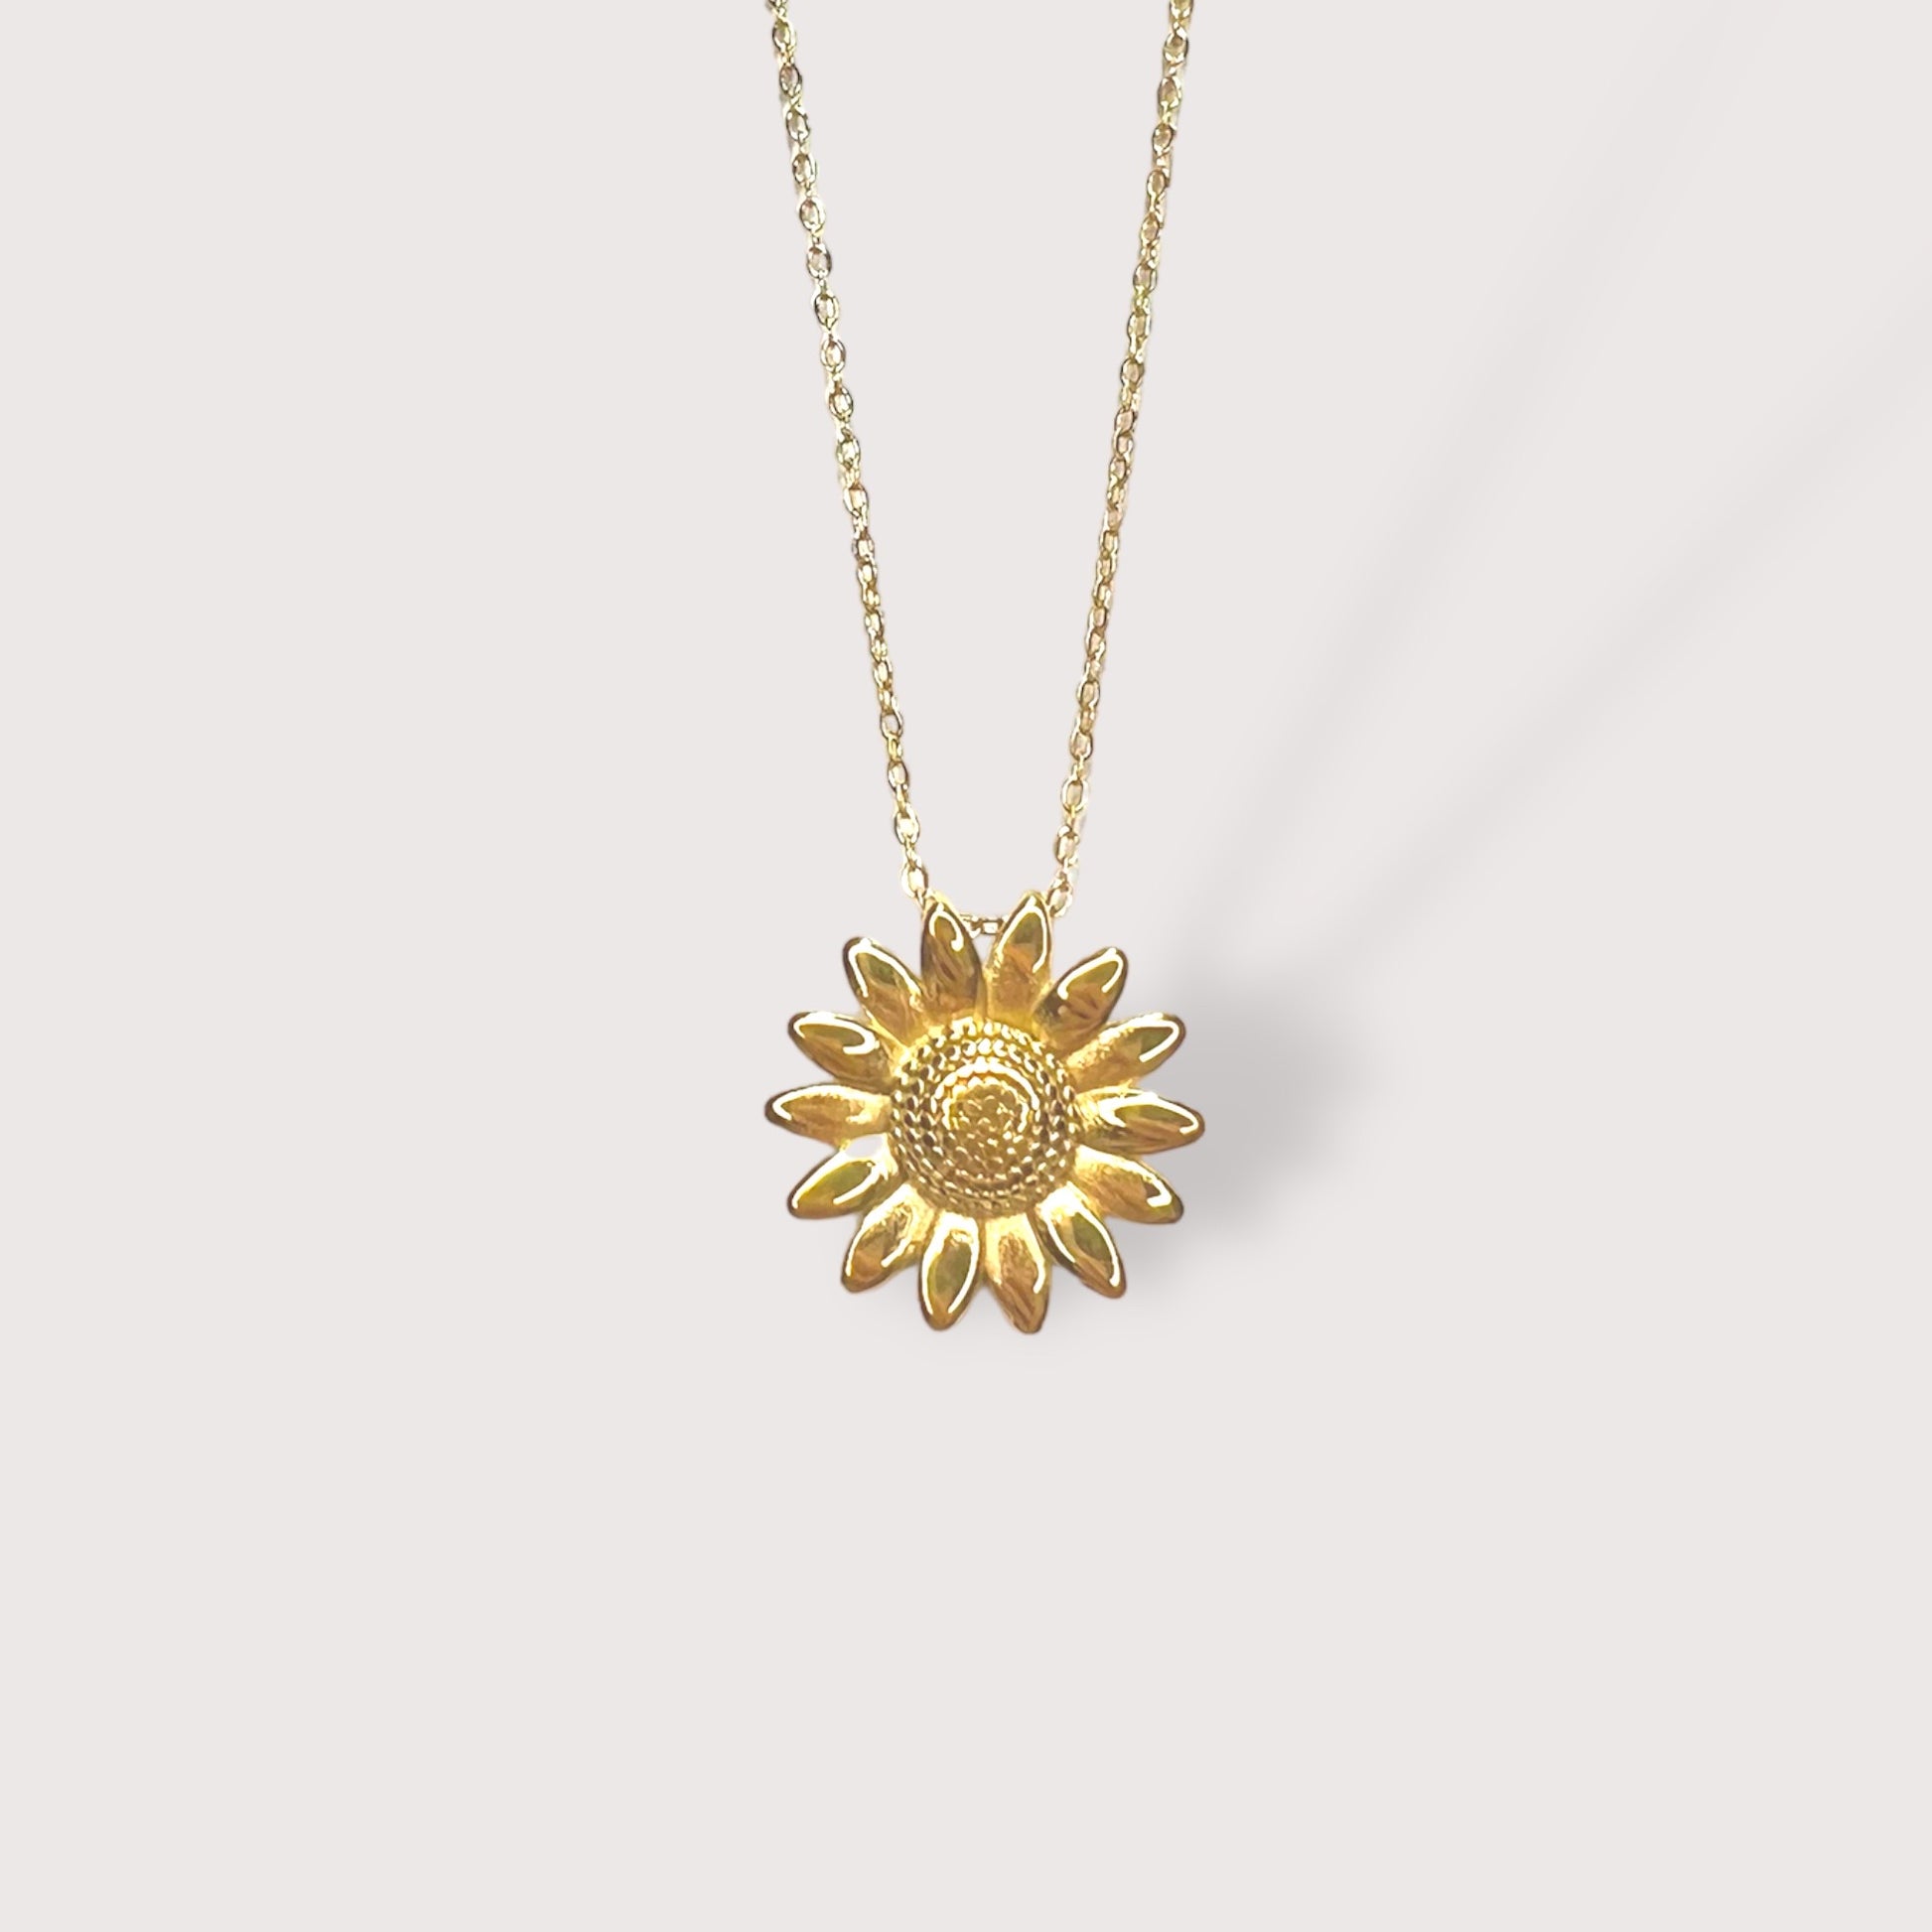 Best Gold Plated Sunflower Necklace and Earrings Set for Women at Rs 399.99  | Gold Plated Necklace Set | ID: 2851766834688